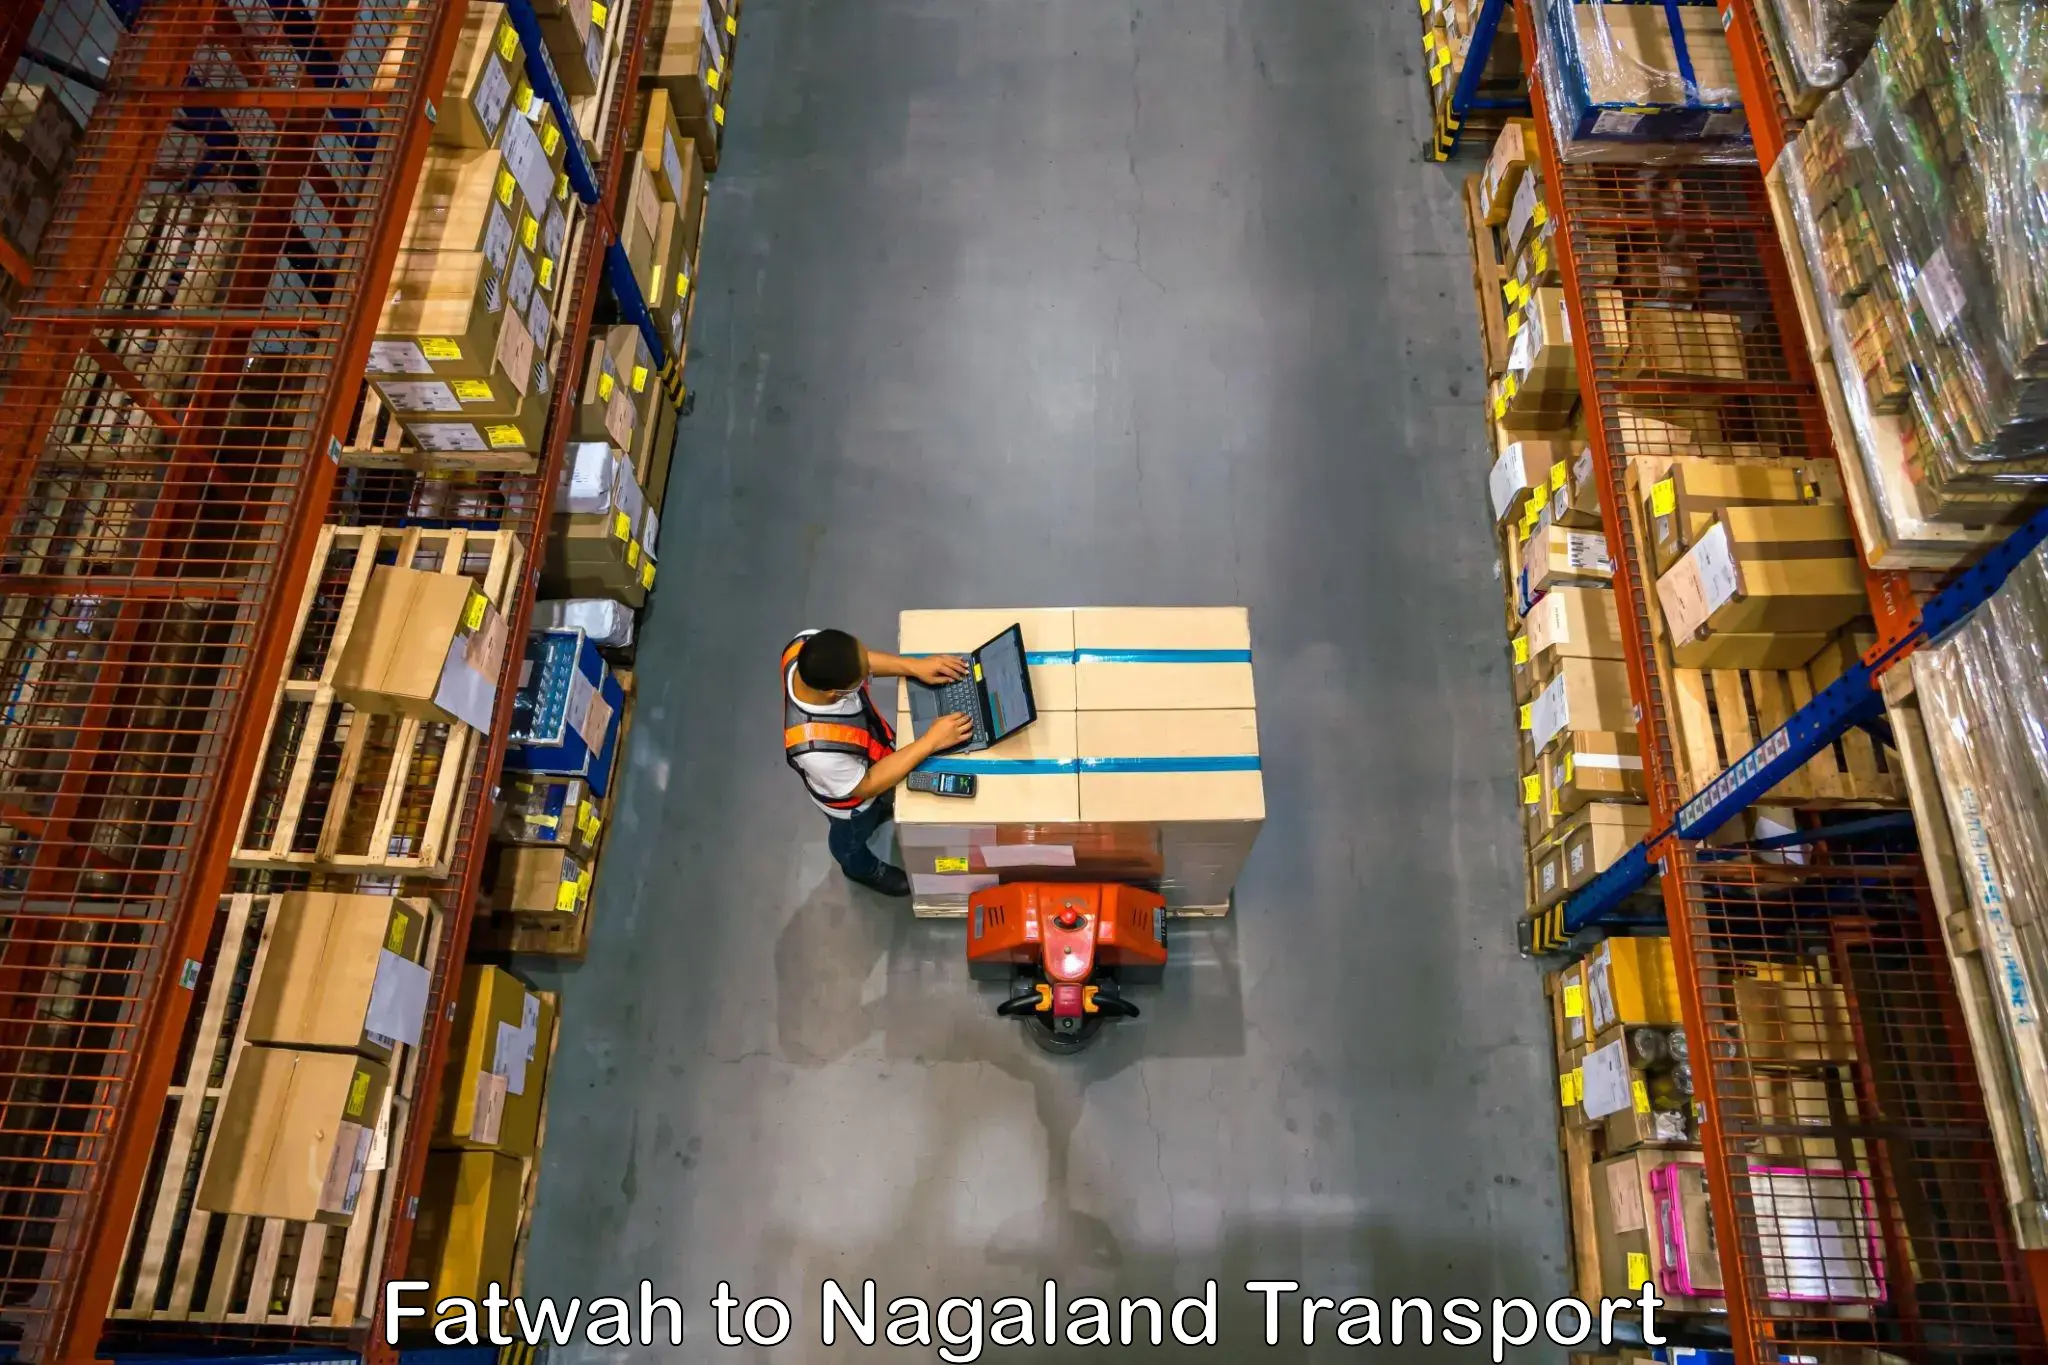 Land transport services in Fatwah to NIT Nagaland